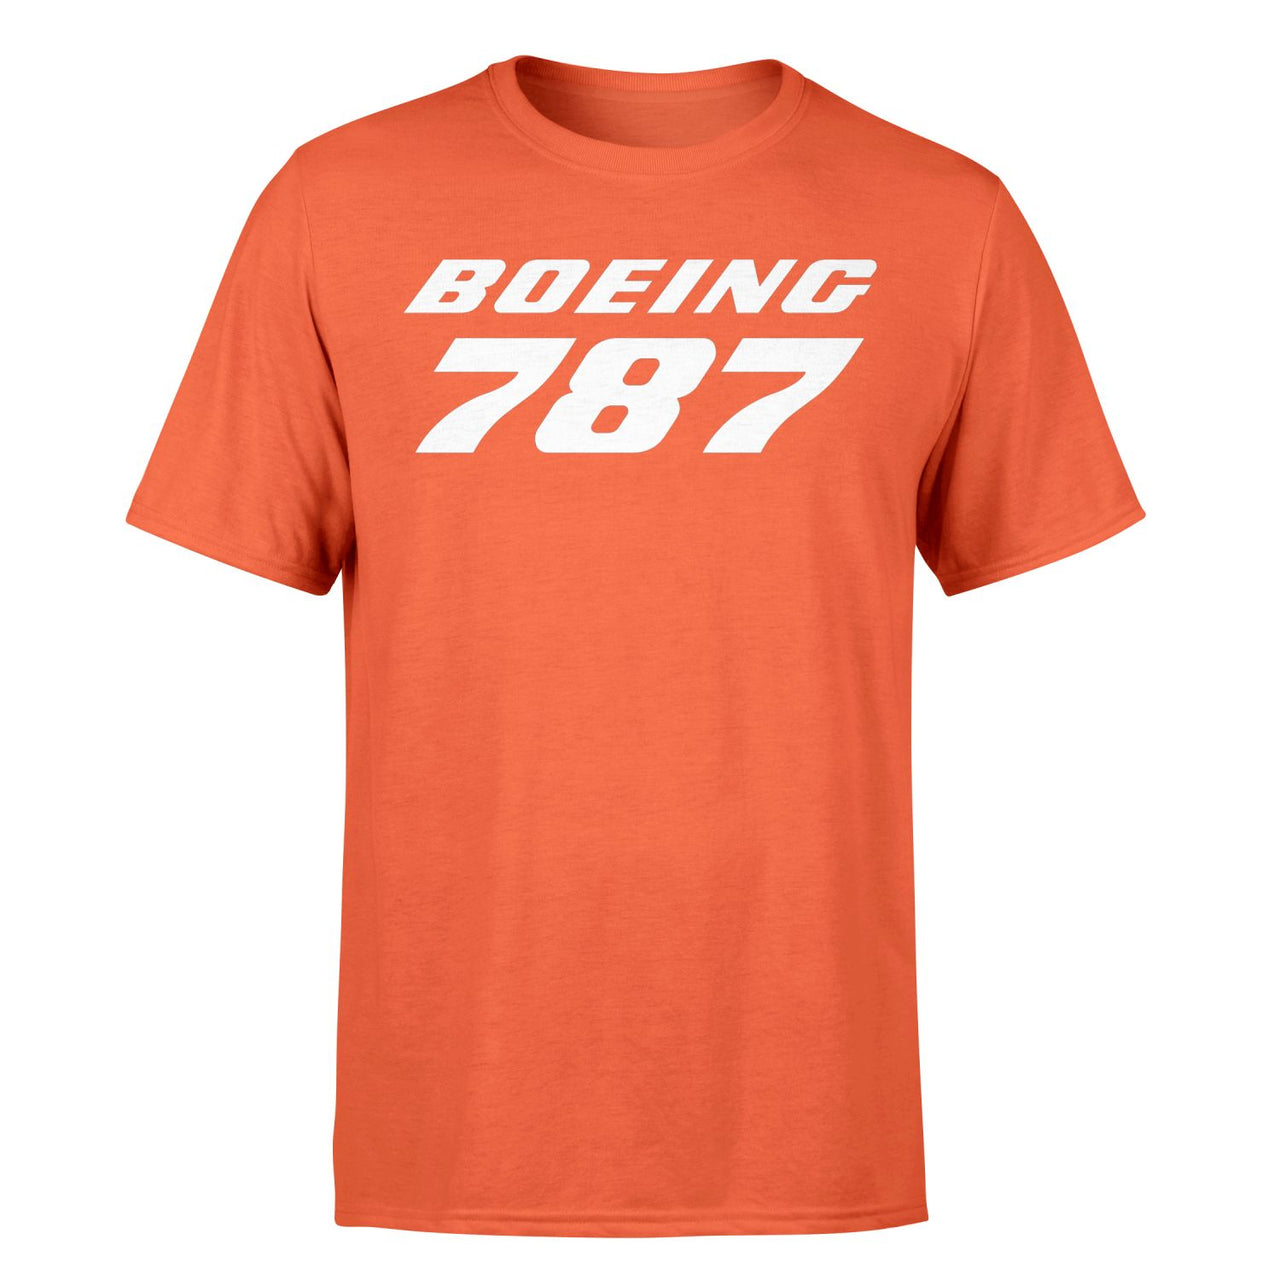 Boeing 787 & Text Designed T-Shirts